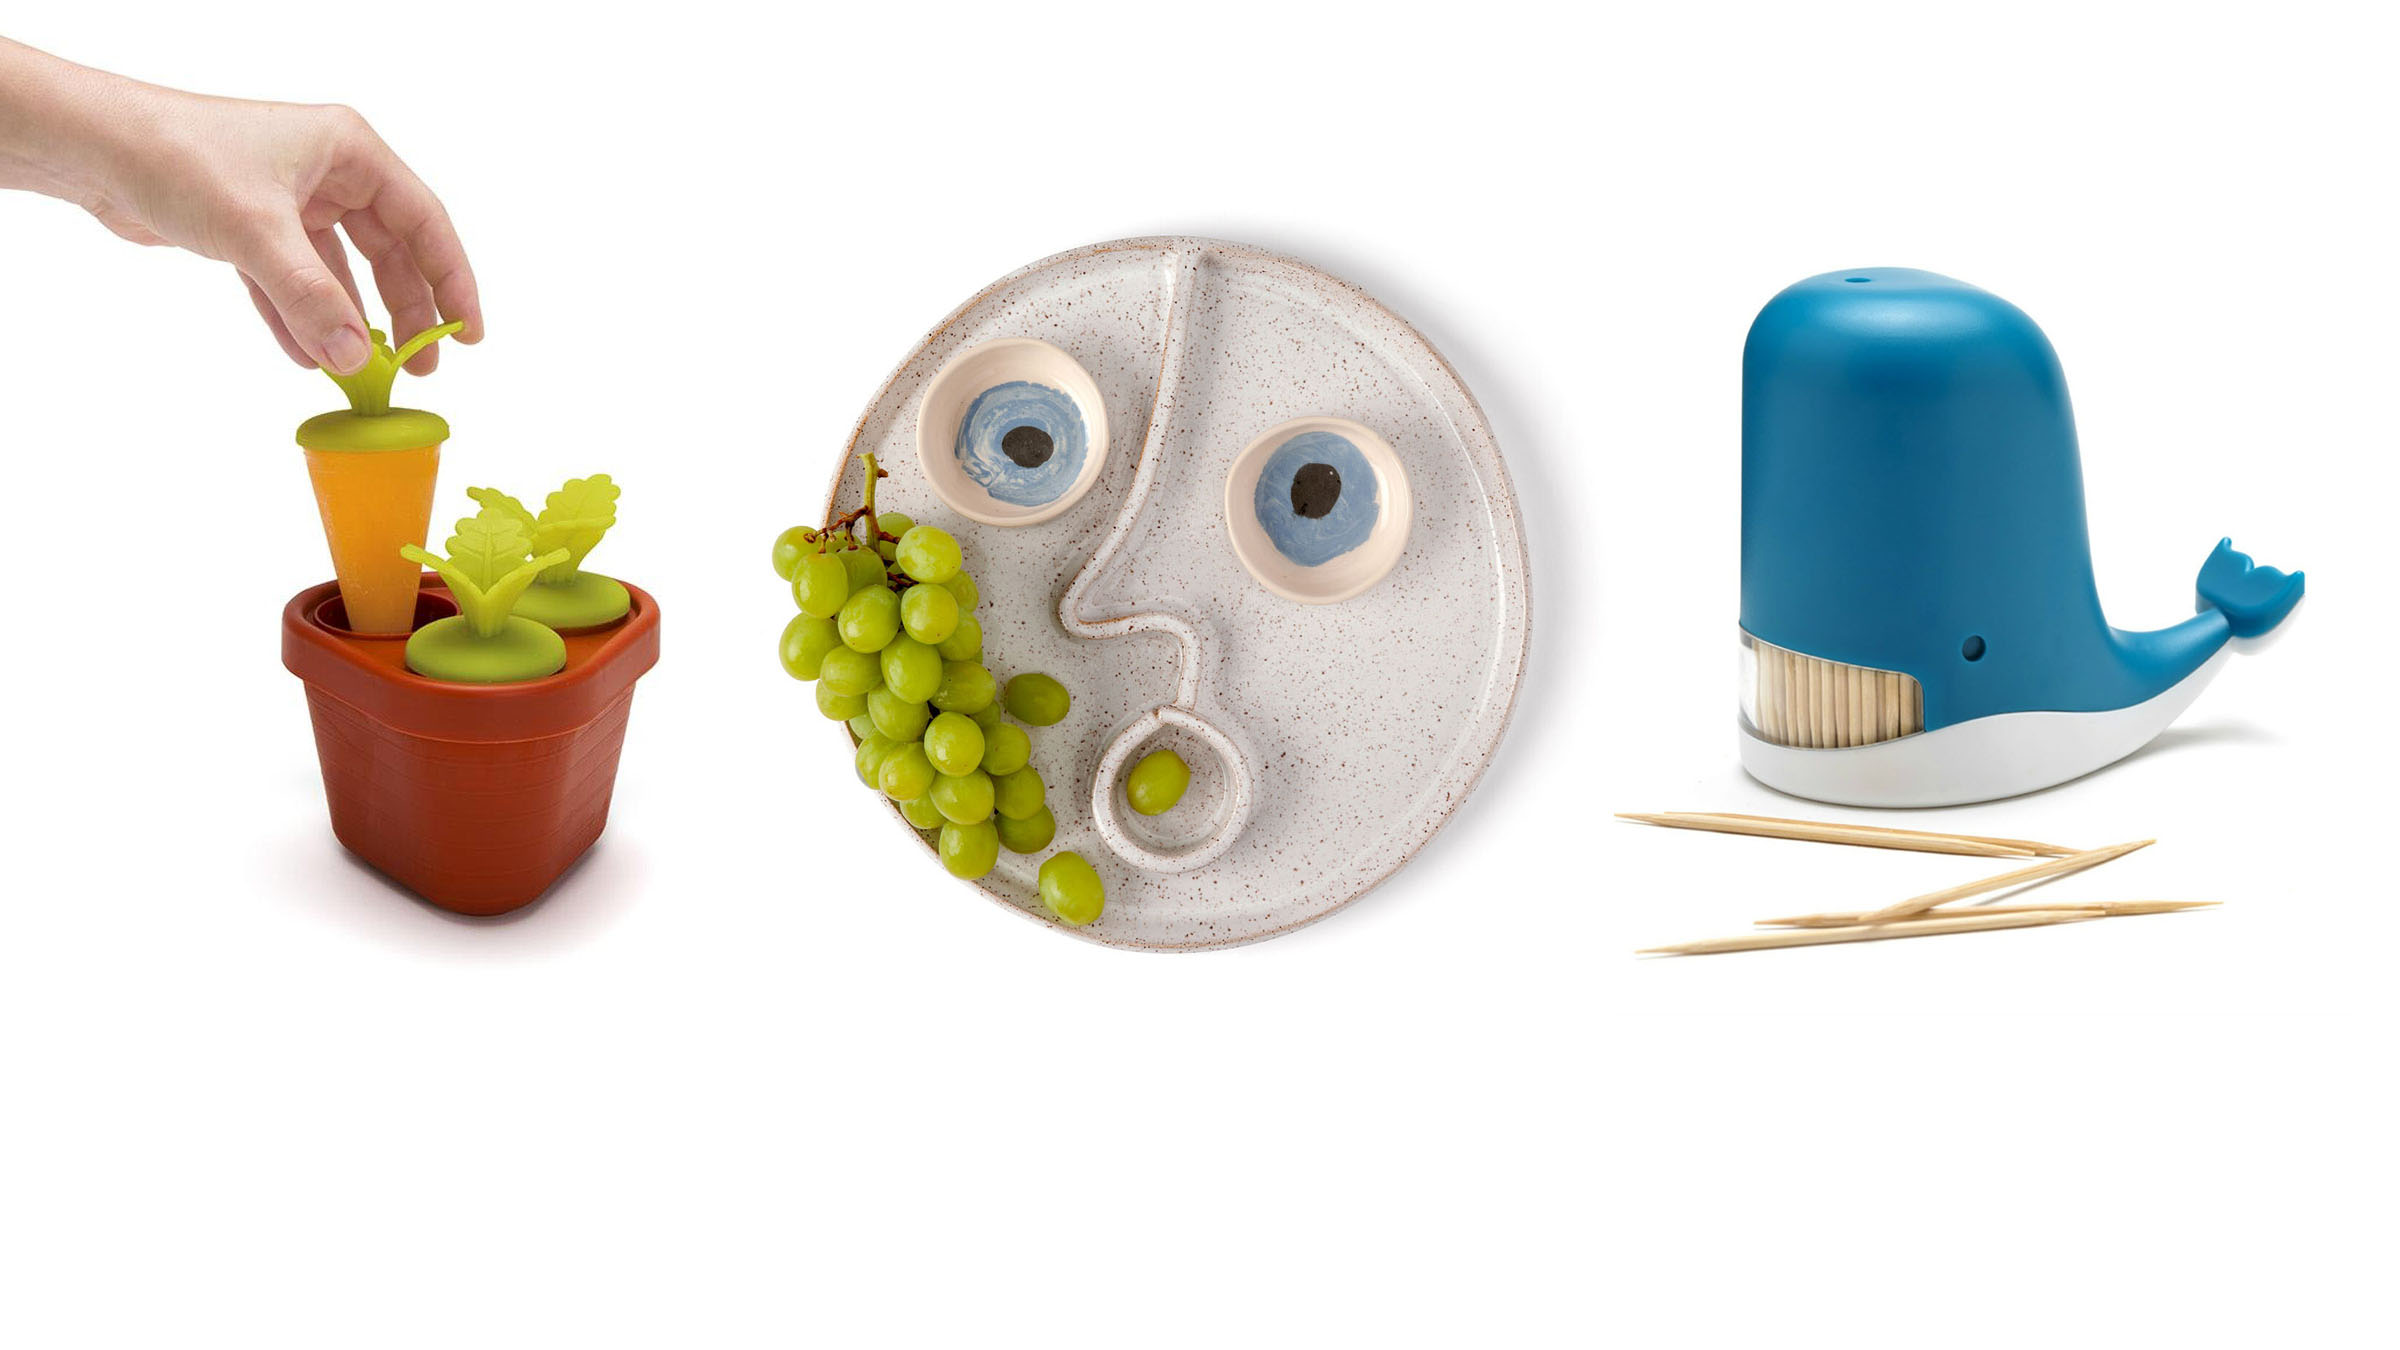 Quirky Cooking: 15 Kitchen Accessories That Are Just Plain Fun, funny  kitchen utensils